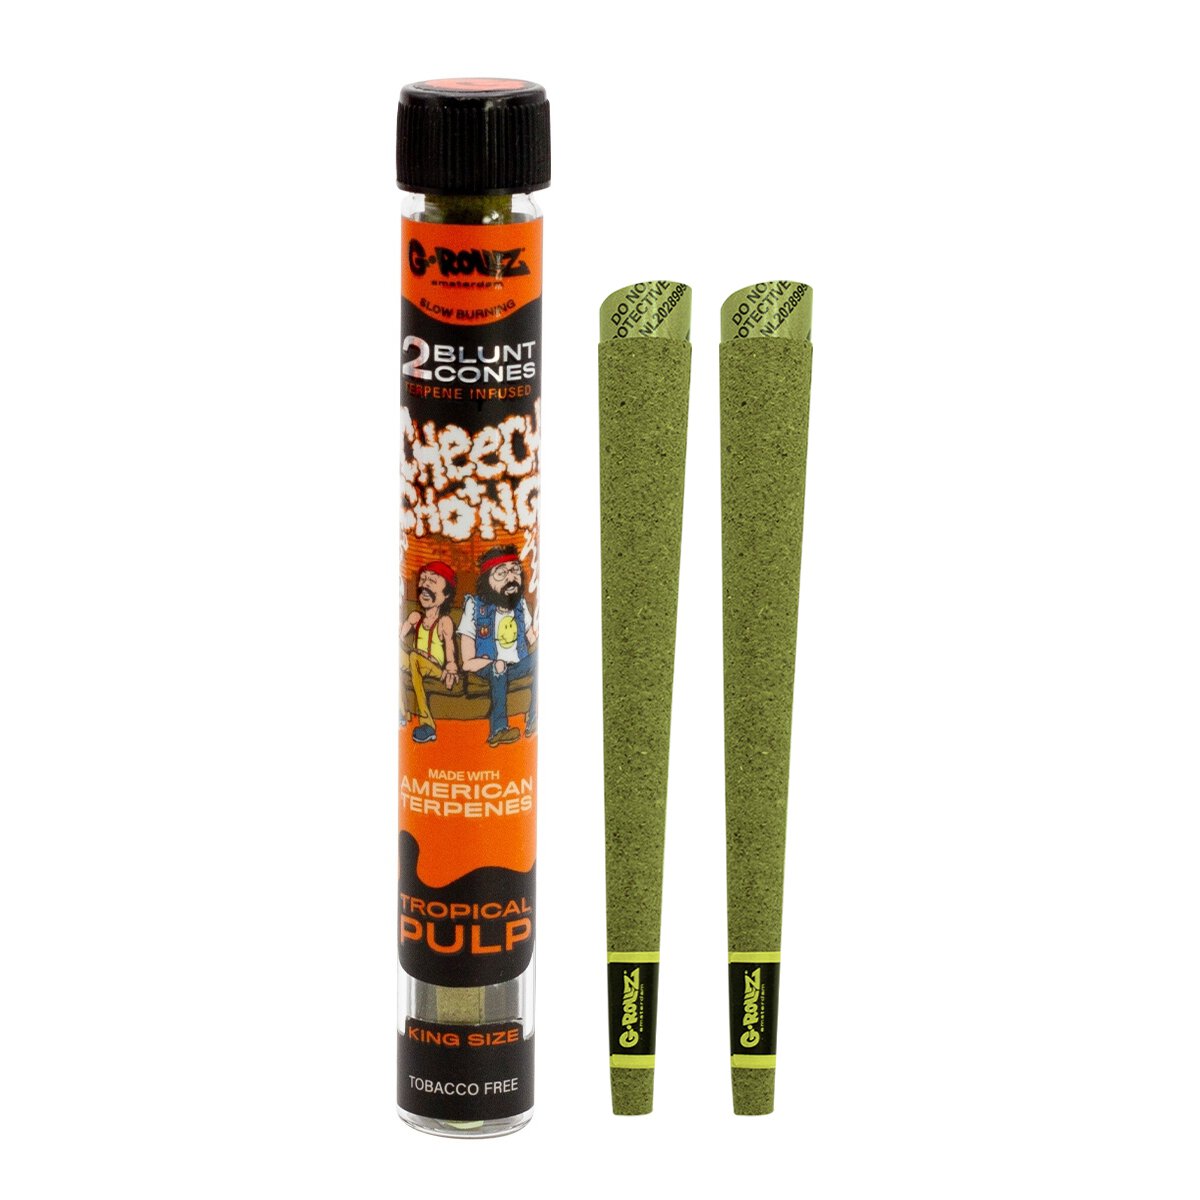 G-Rollz Cheech & Chong Terpene Infused Blunt Cones 'Tropical Pulp 